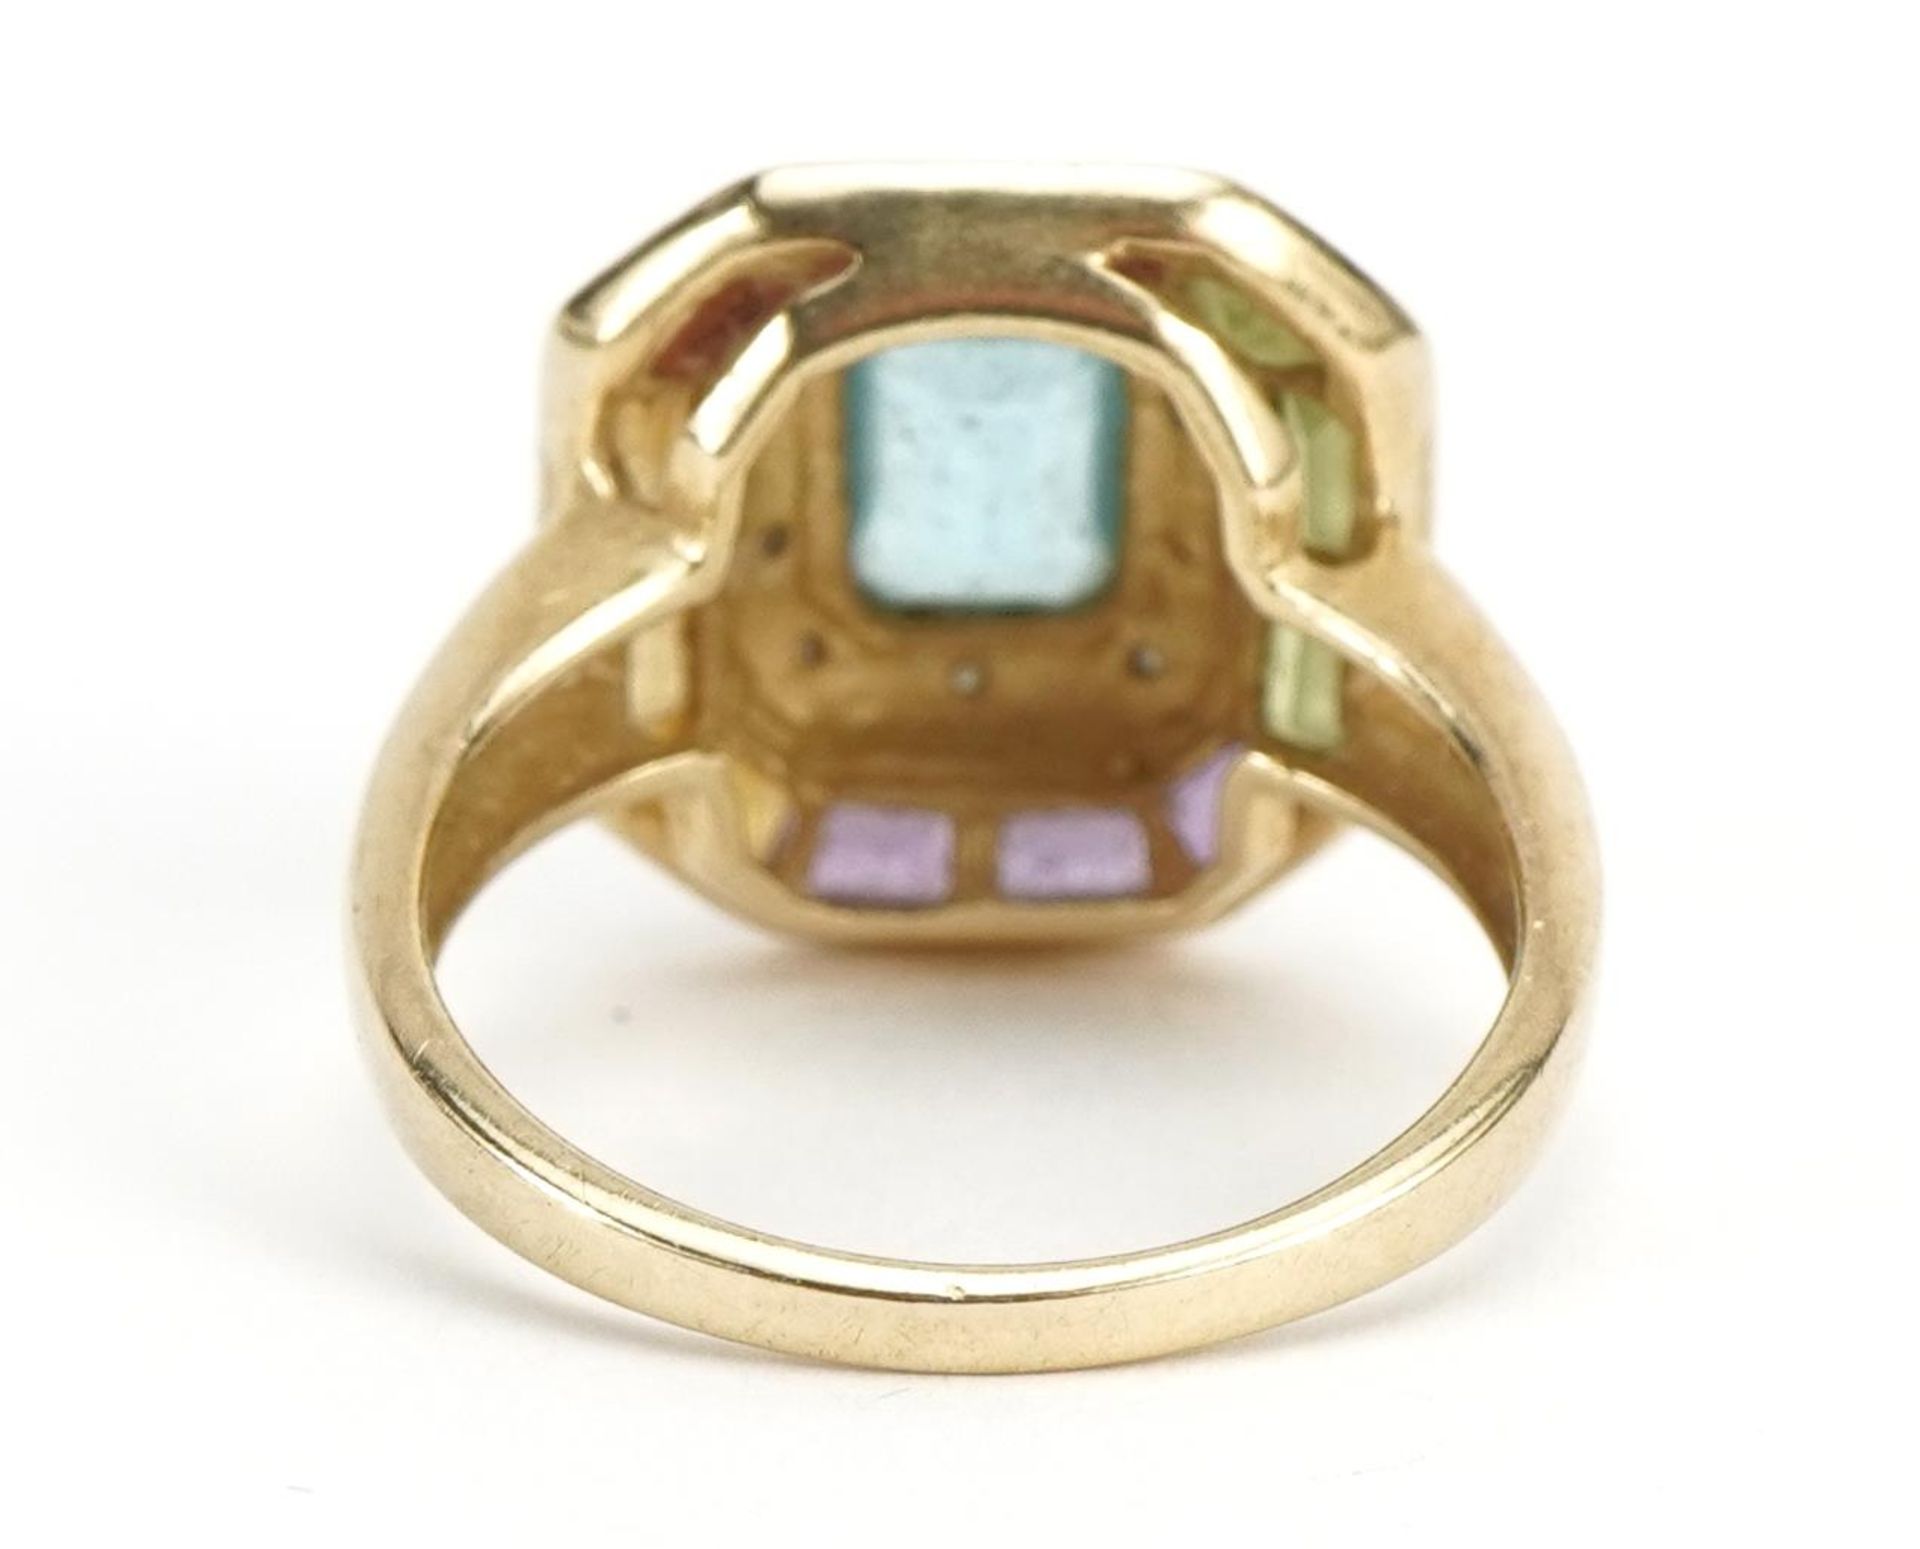 Art Deco style 10k gold multi gem and diamond ring with split shoulders, size N, 4.1g - Image 2 of 5